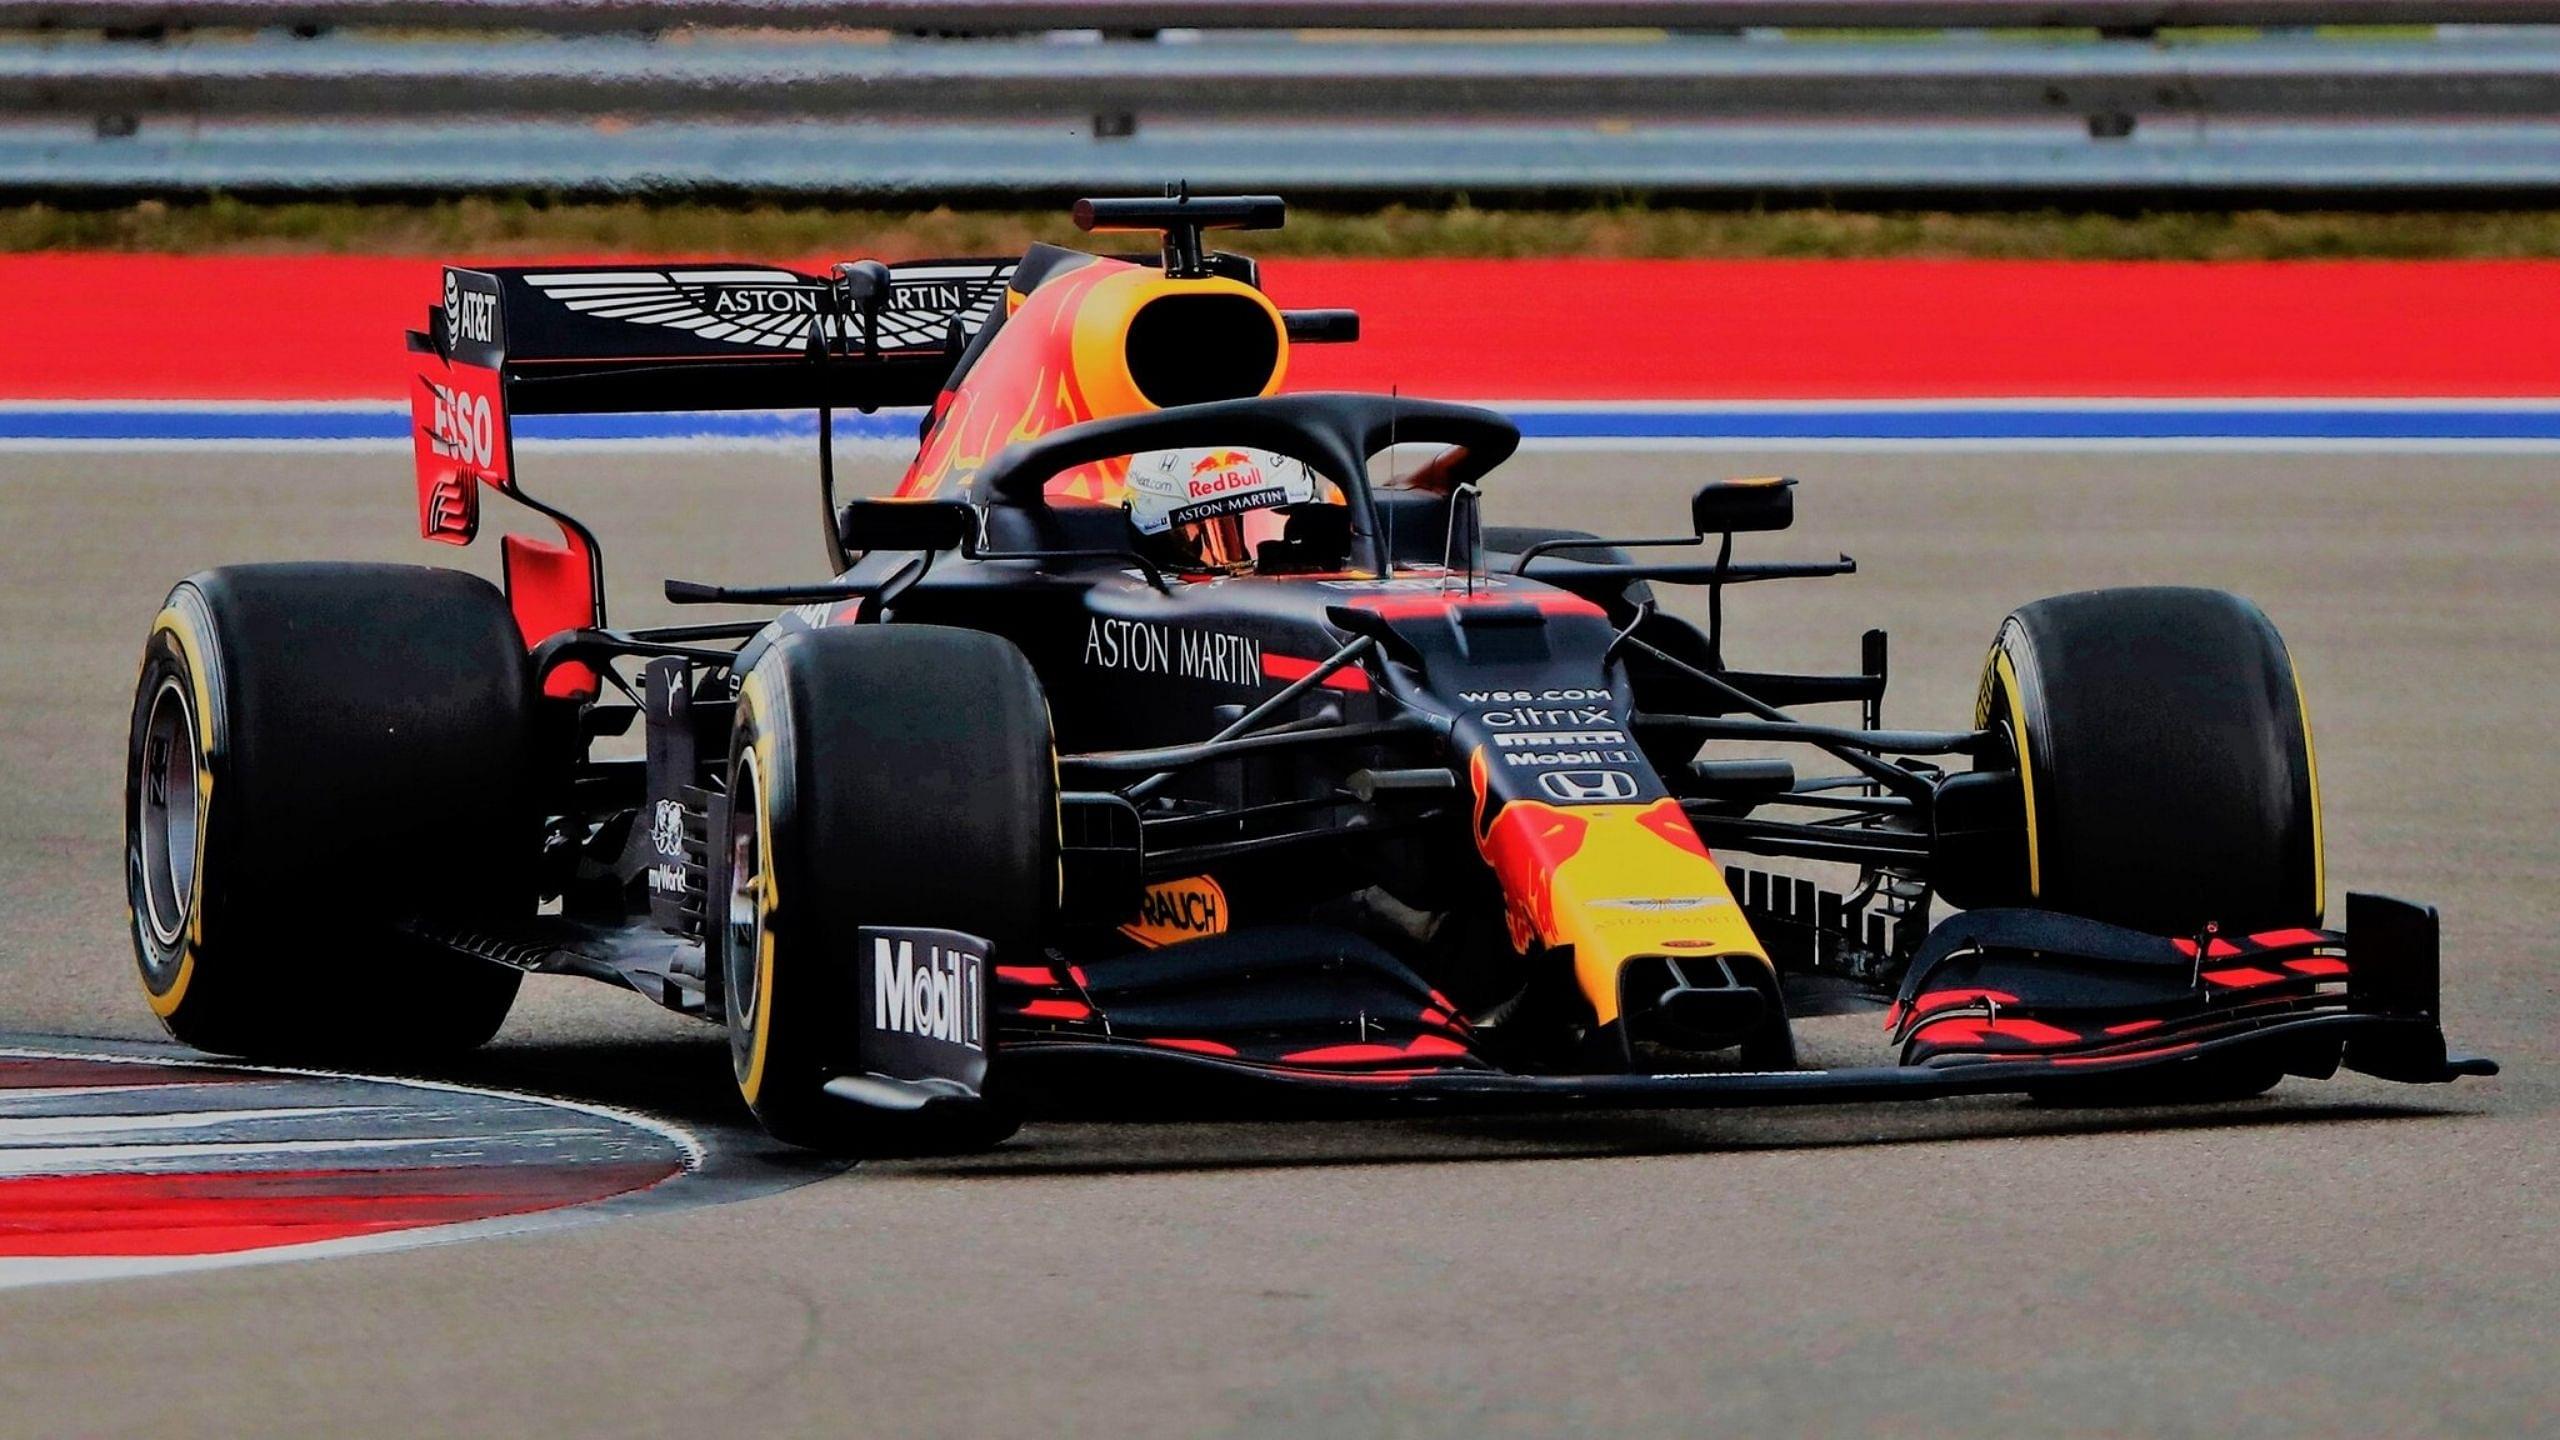 “Something broke on the car” - Red Bull's Max Verstappen crashes out of the Emilia Romagna Grand Prix at Imola